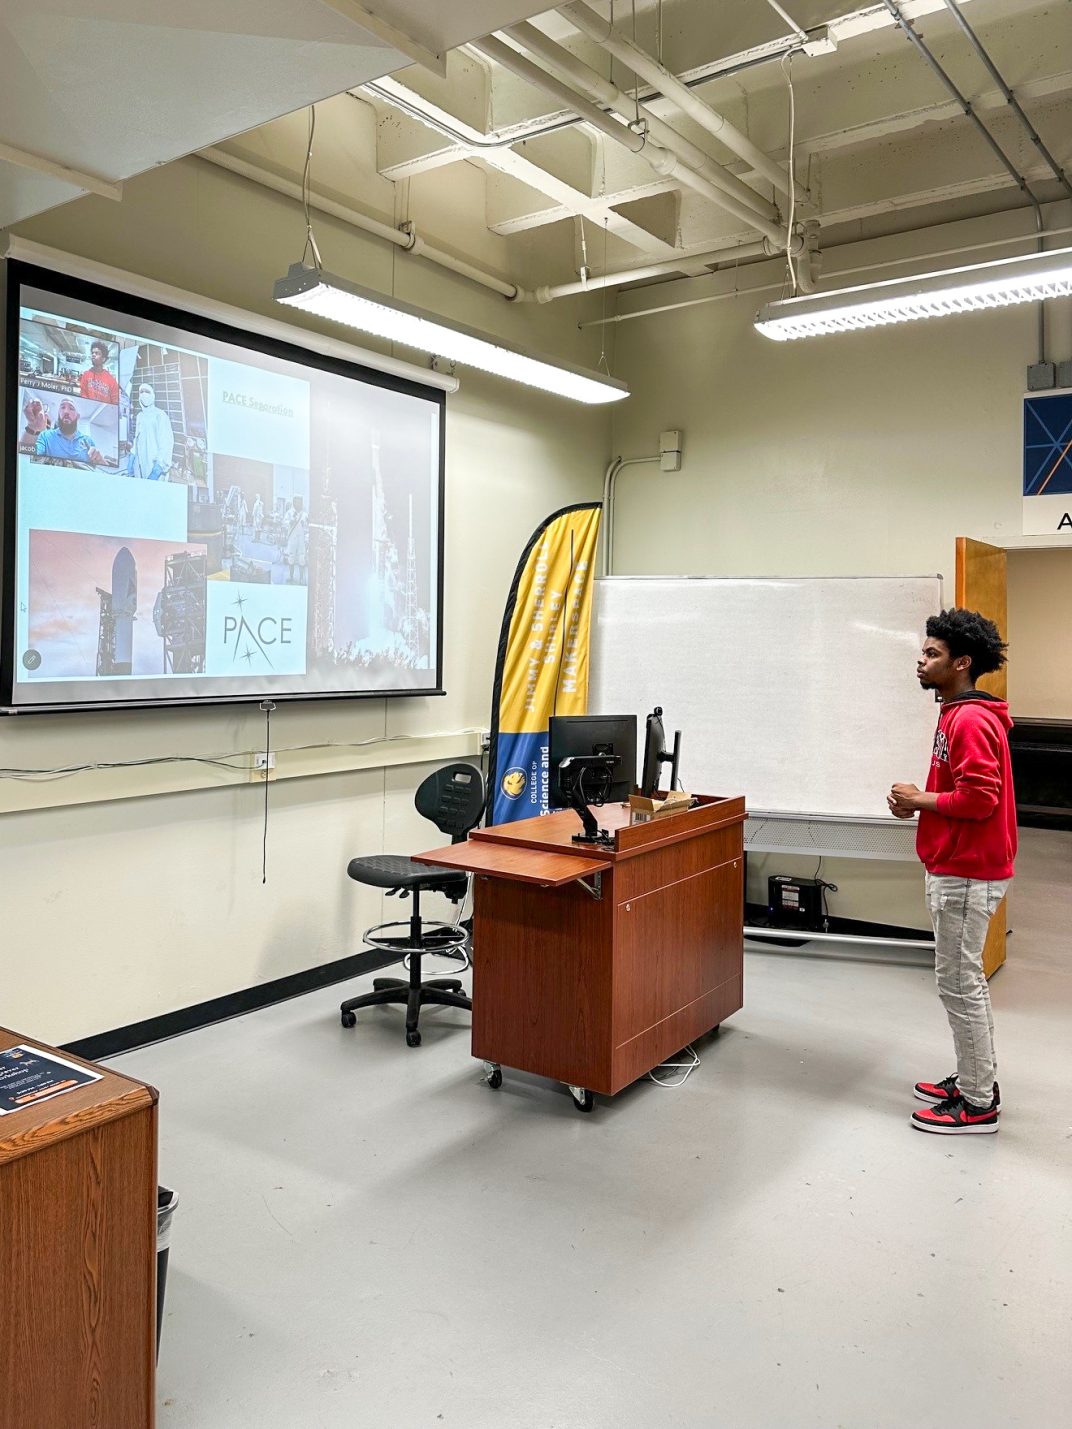 A student stands facing a projector screen displaying a video call.